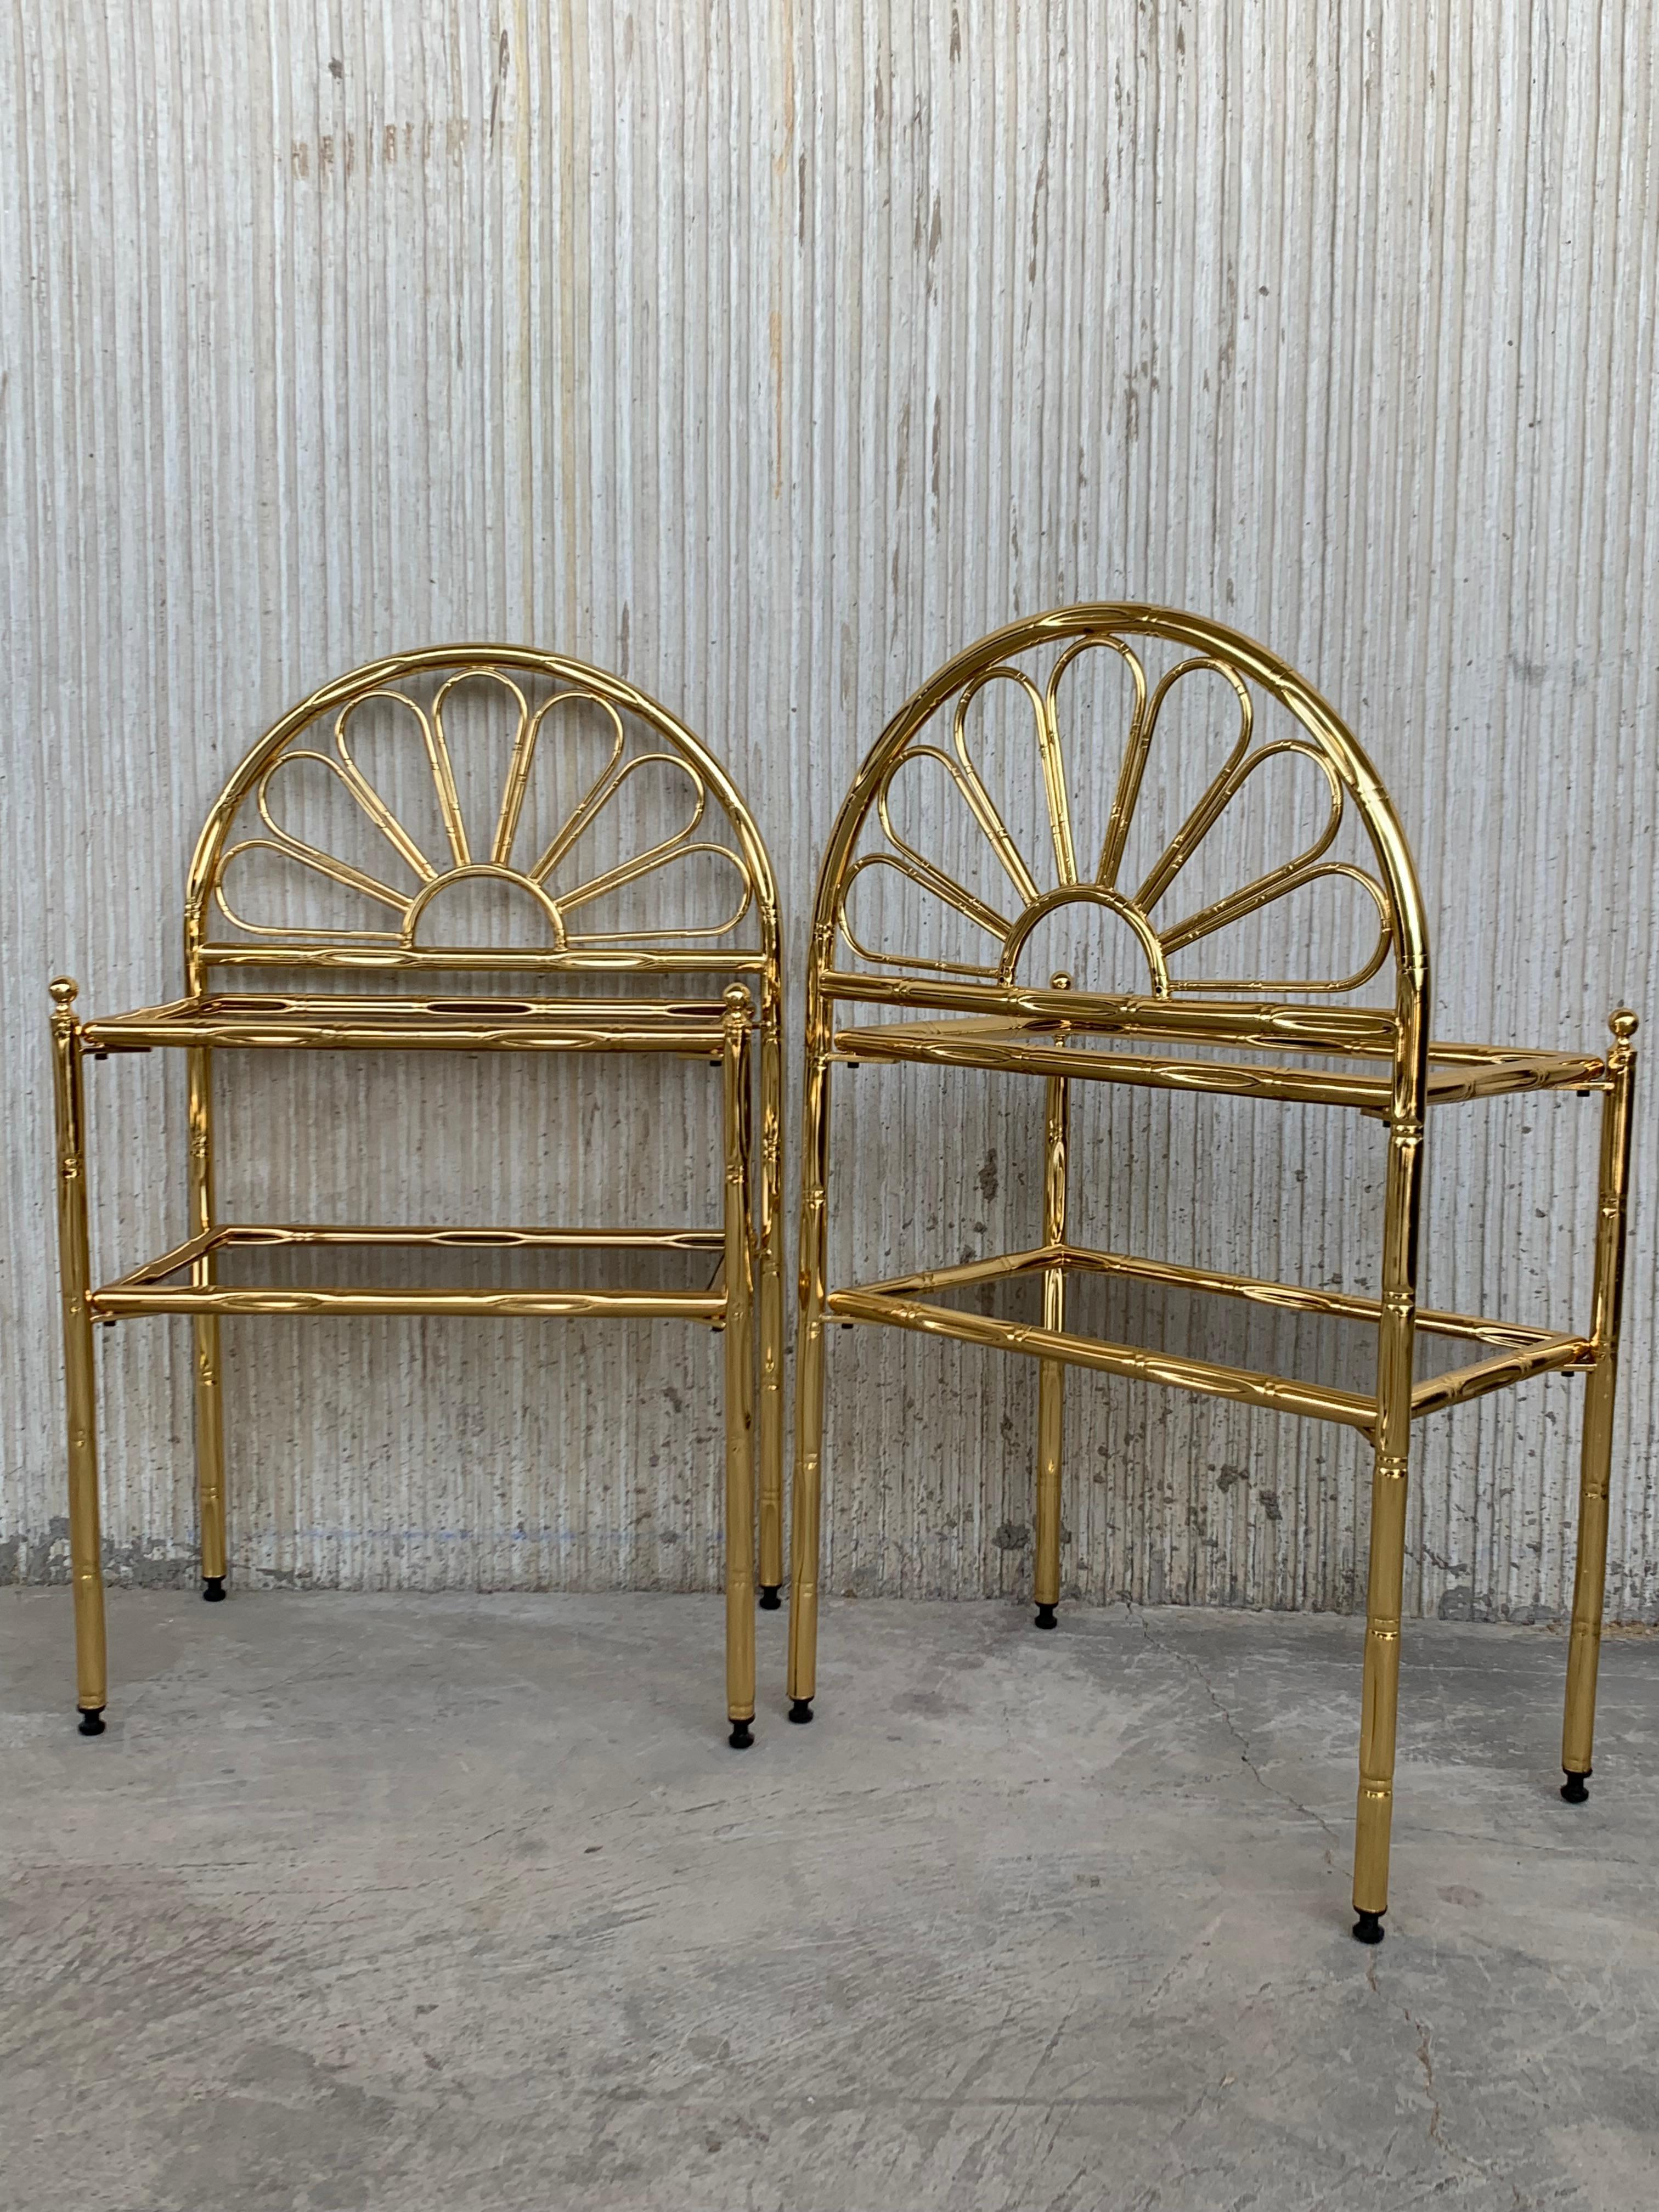 Mid-Century Modern Italian Faux Bamboo Gilt Metal NightStands with Smoked Glass

Total Height: 31in
Height to high shelve: 20.47in 
Height to the low shelves: 12.6in